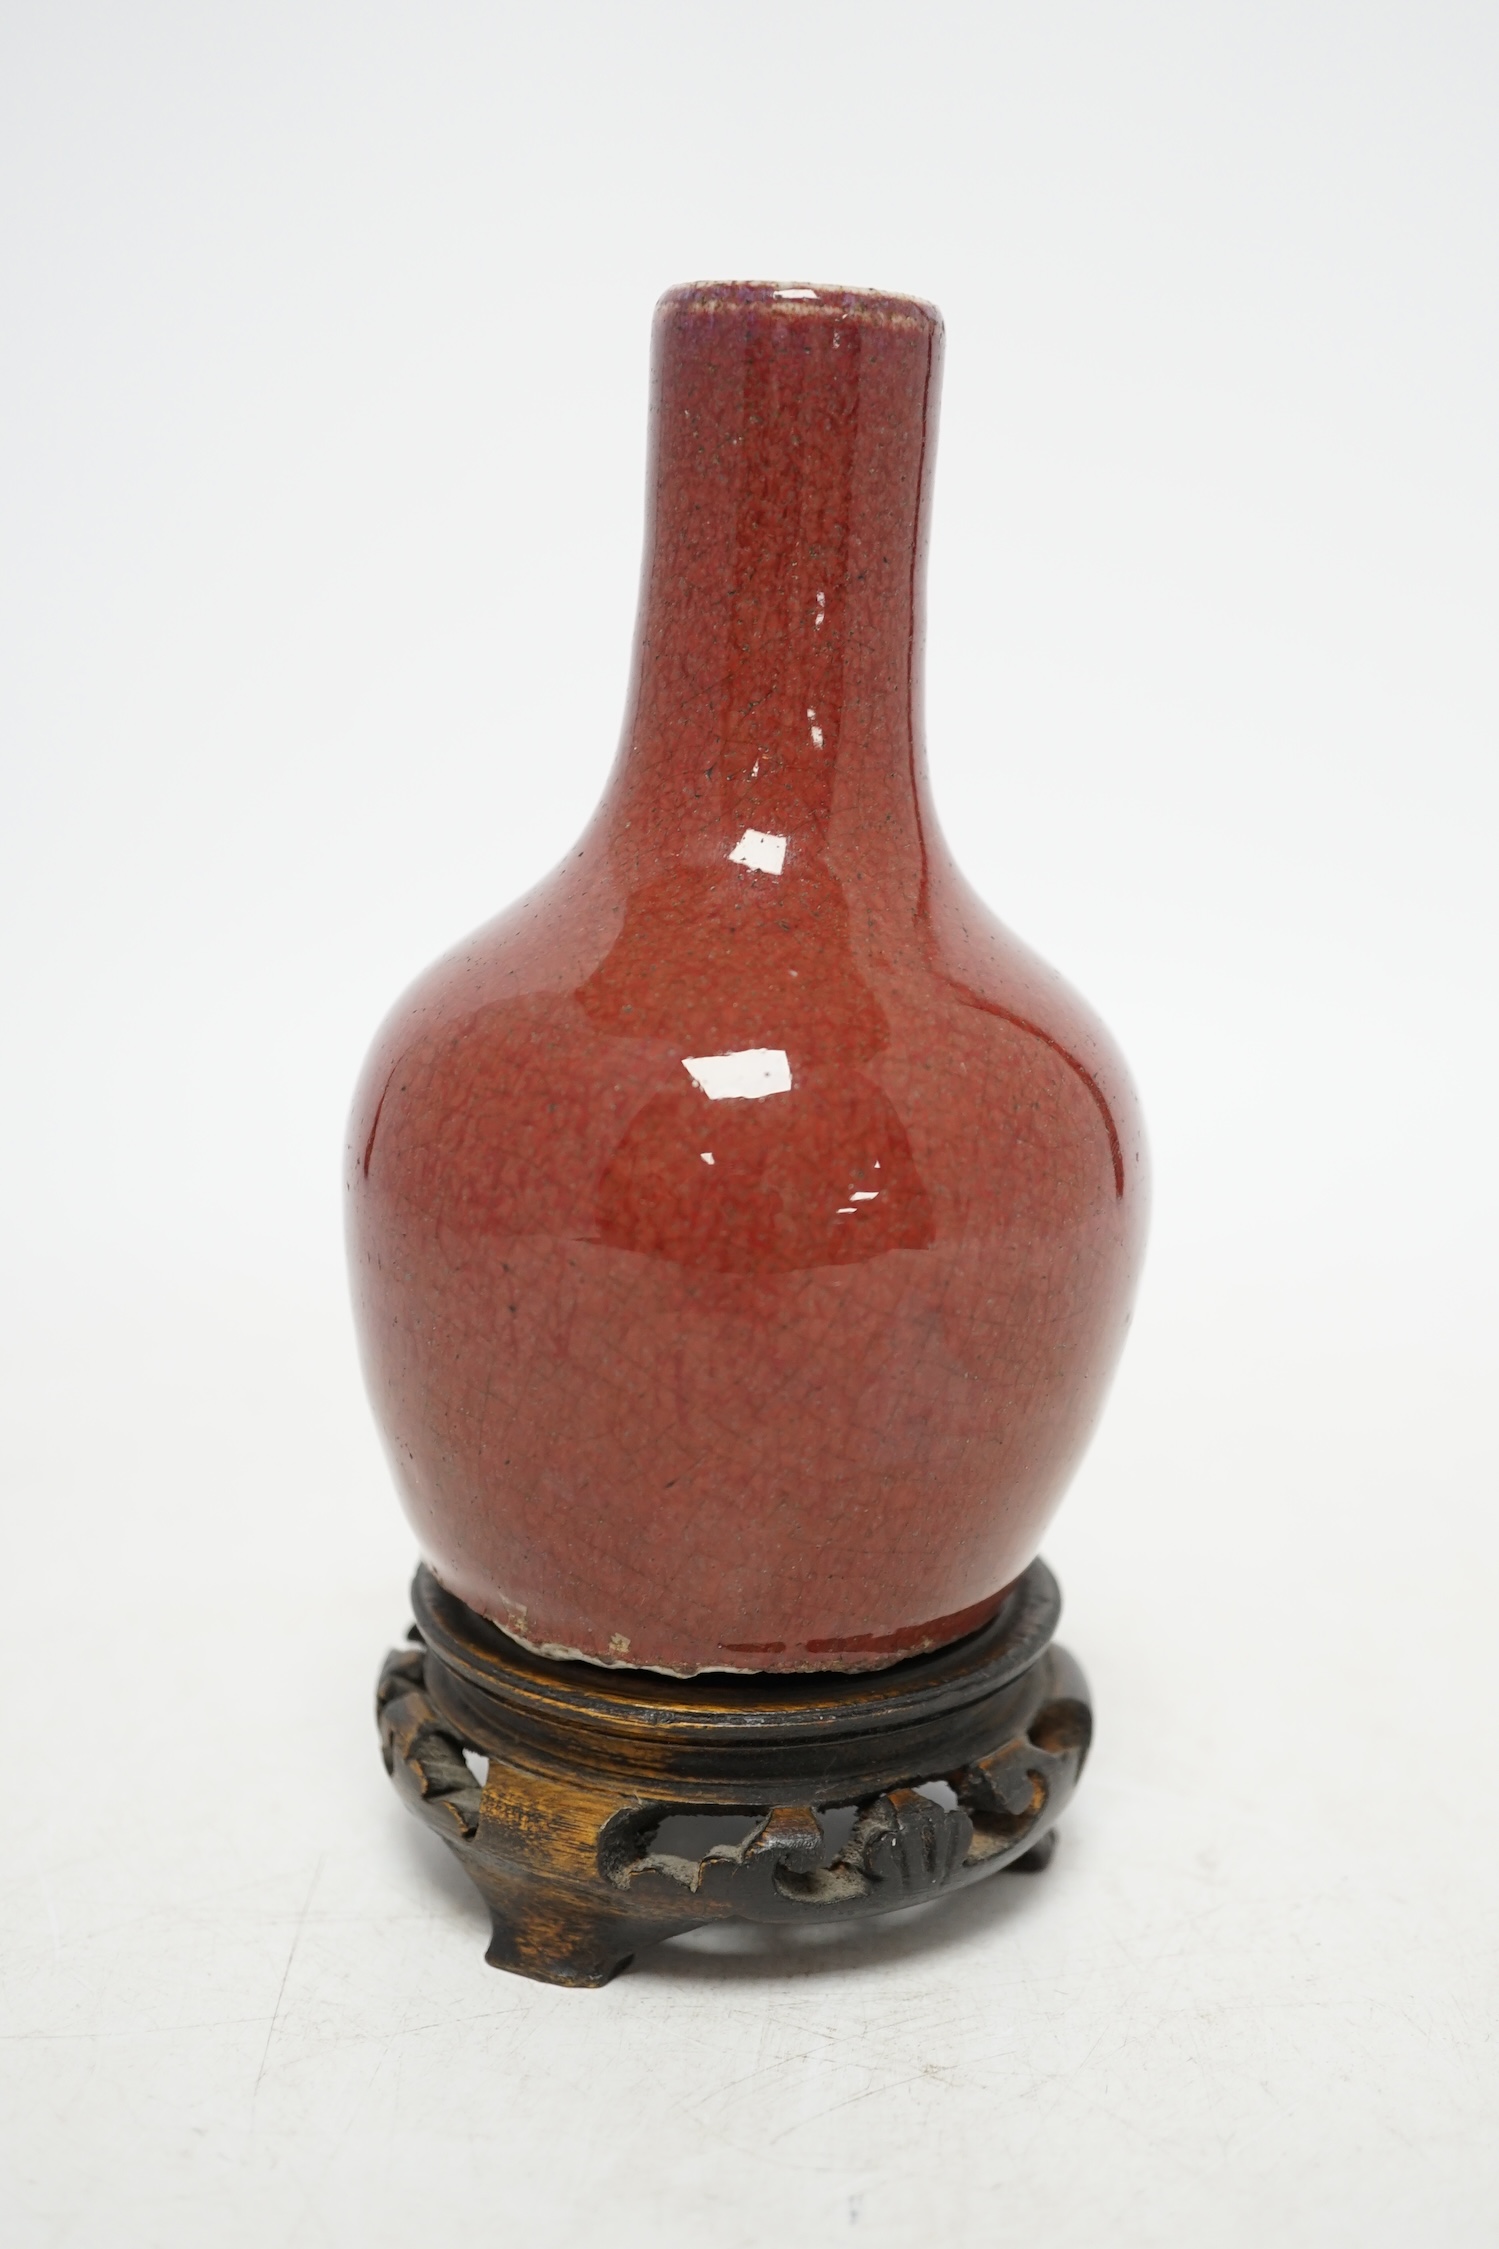 A 18th century Chinese sang de boeuf vase and associated stand, overall 16cm high. Condition - good